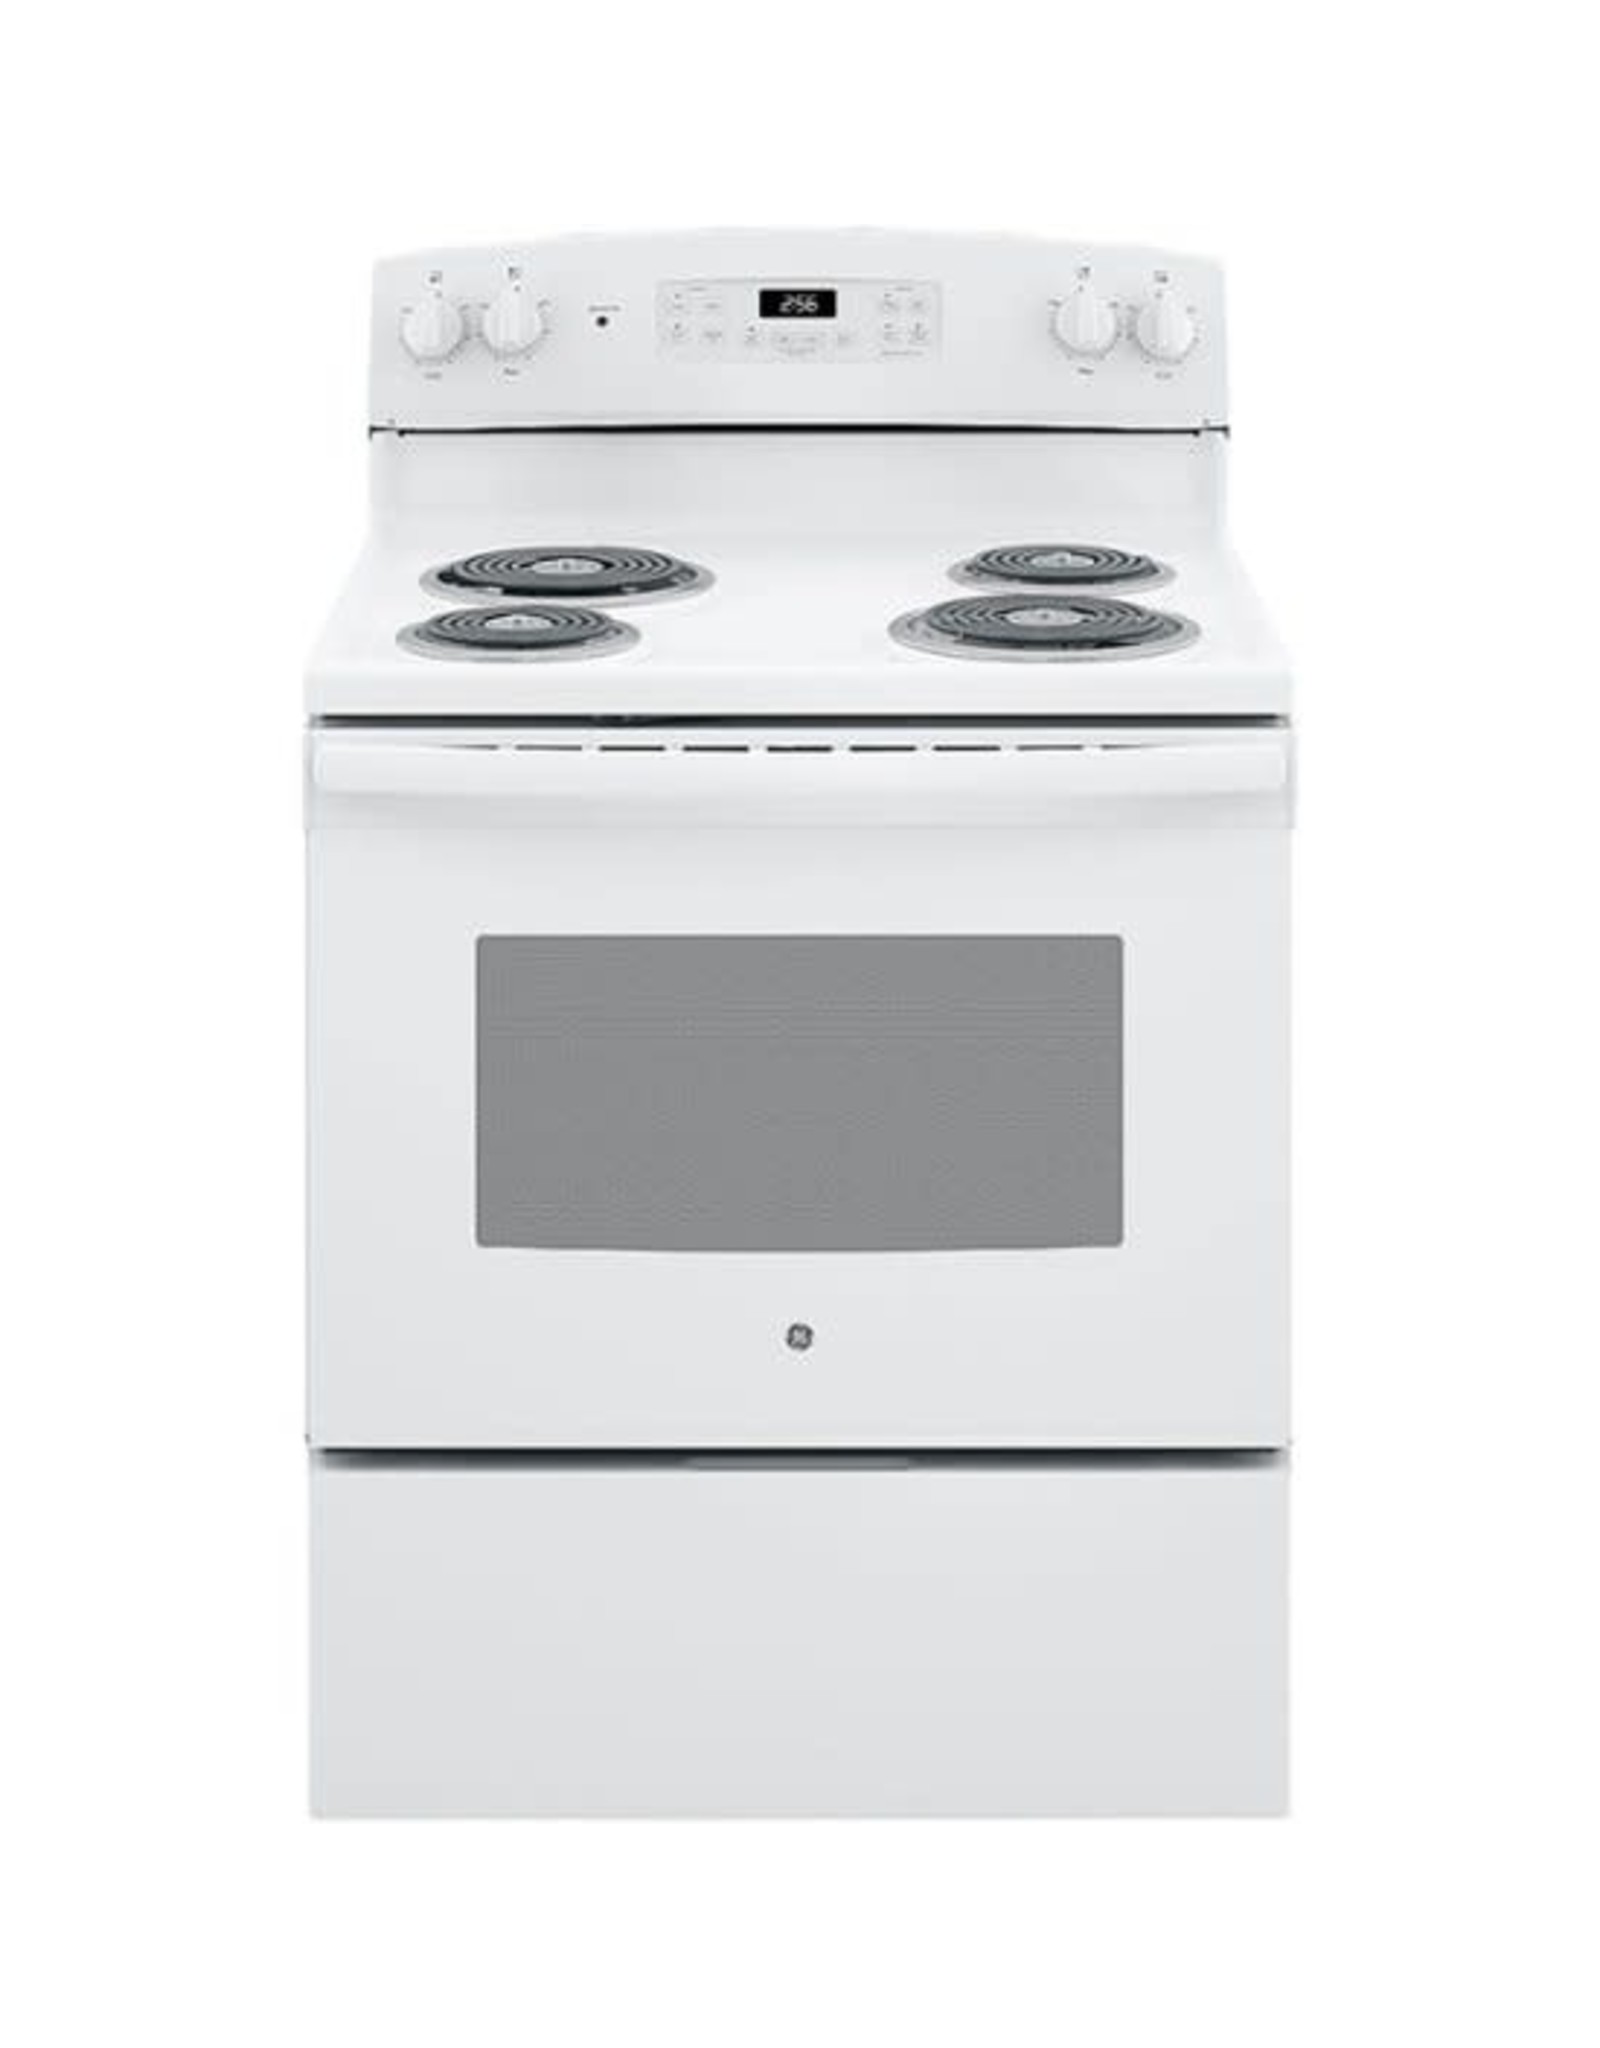 GE GE 30 in. 5.0 cu. ft. Electric Range with Self-Cleaning Oven in White